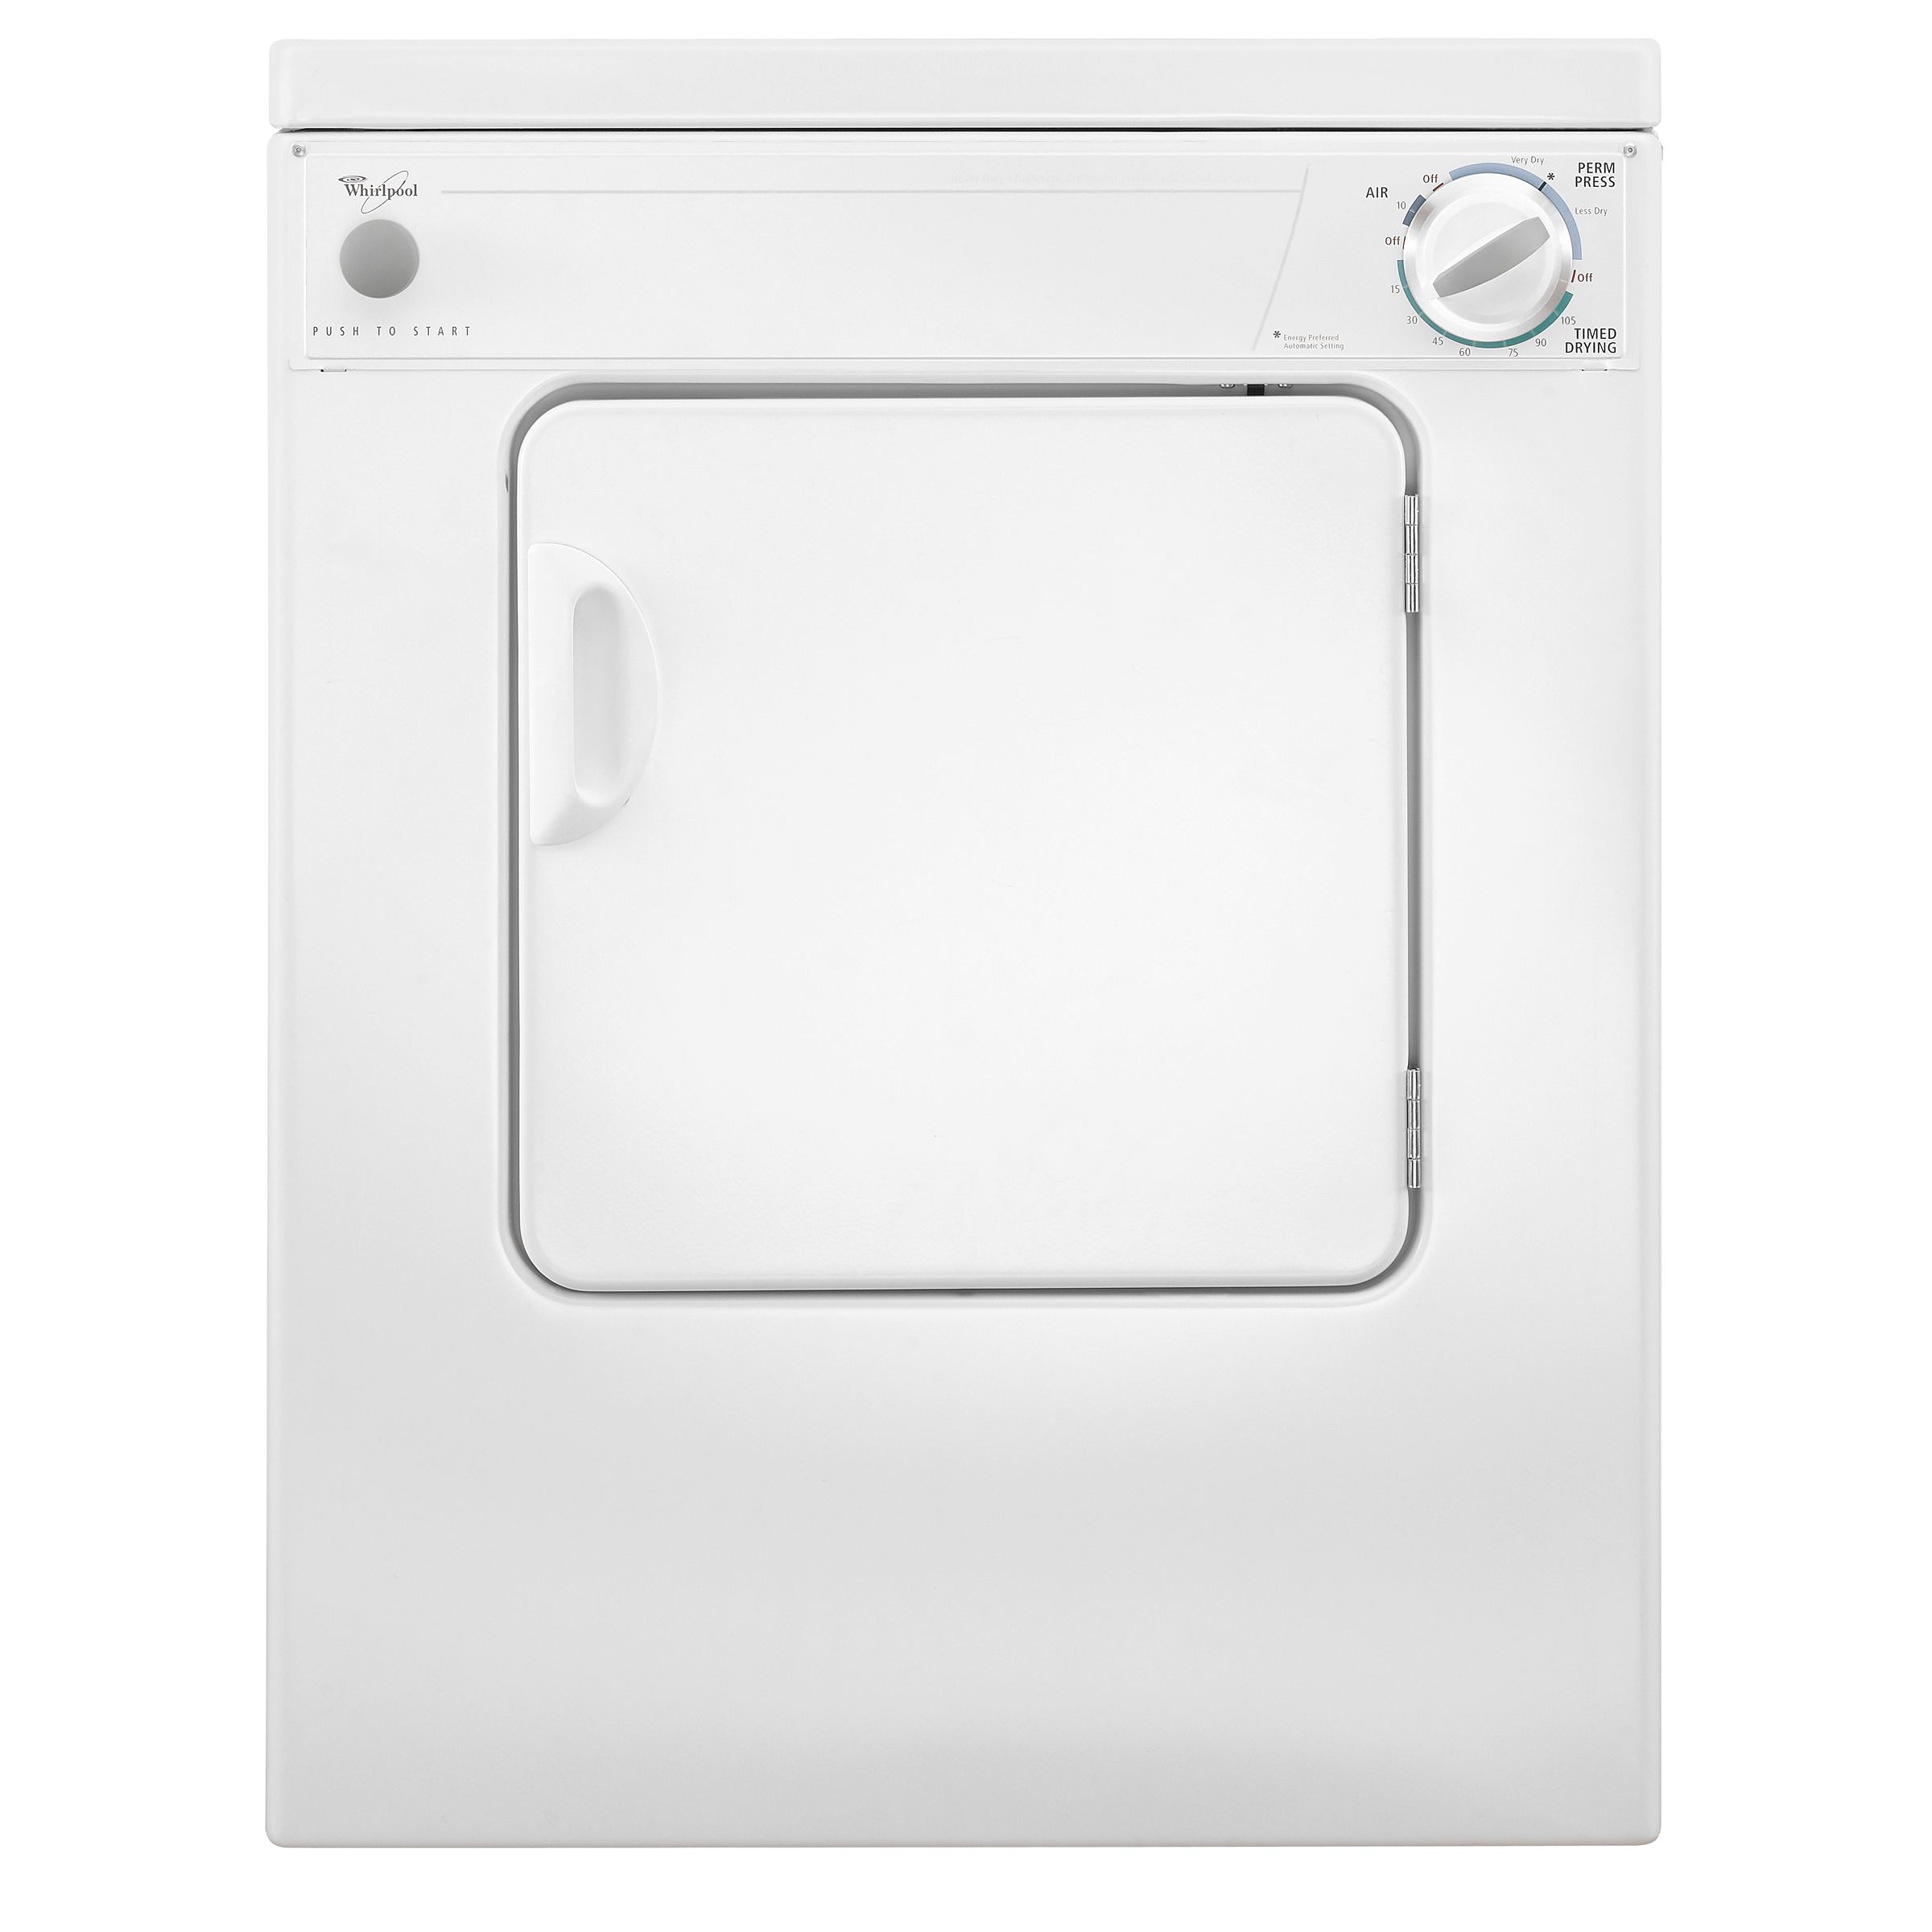 Whirlpool 3.4 cu. ft. 120V Electric Dryer - White Less than 4 cu. ft.